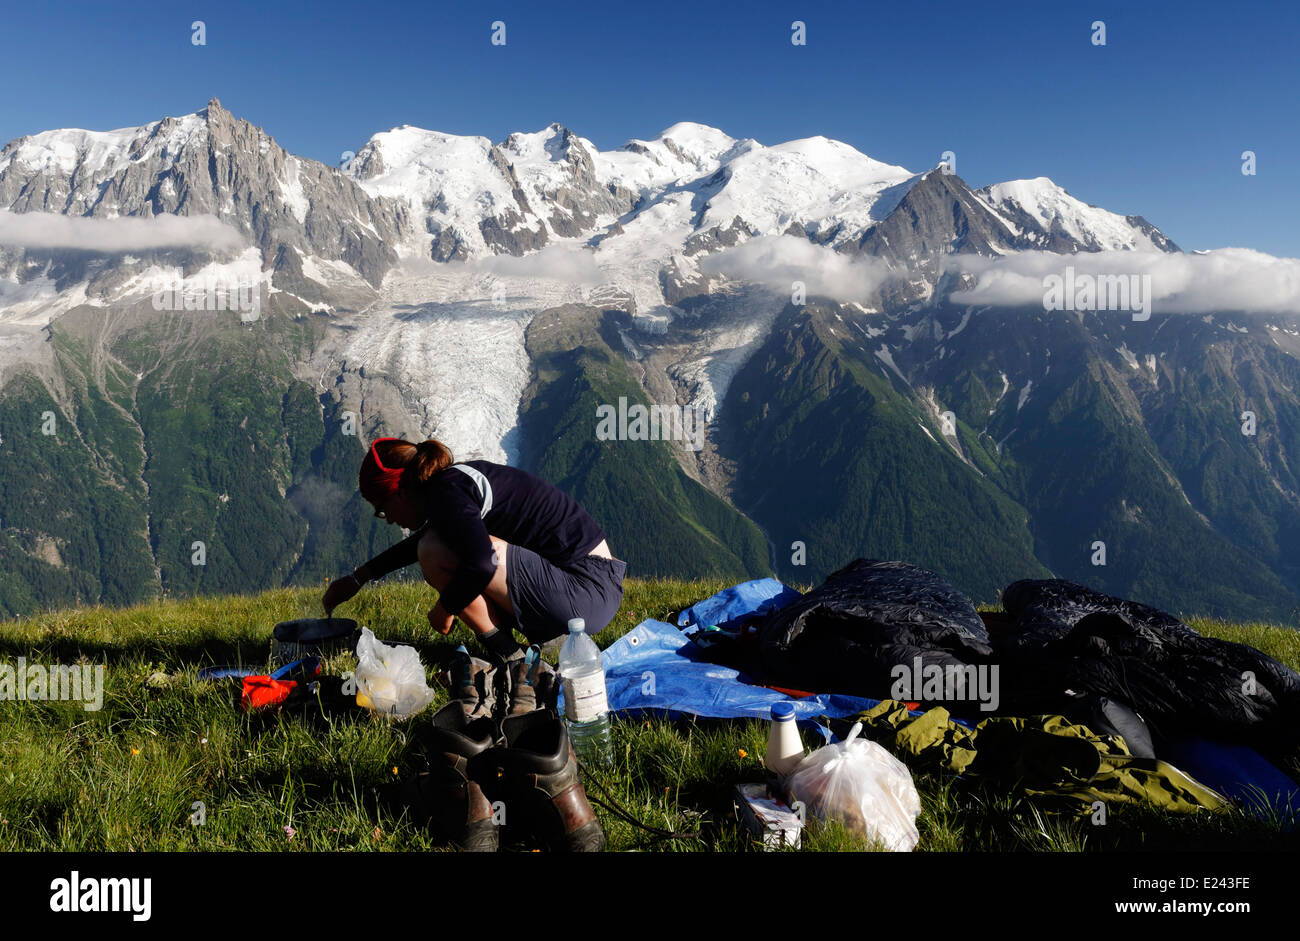 A lady camper preparing food wild camping on le Brevent  in the French Alps with the Mont Blanc massif beyond Stock Photo